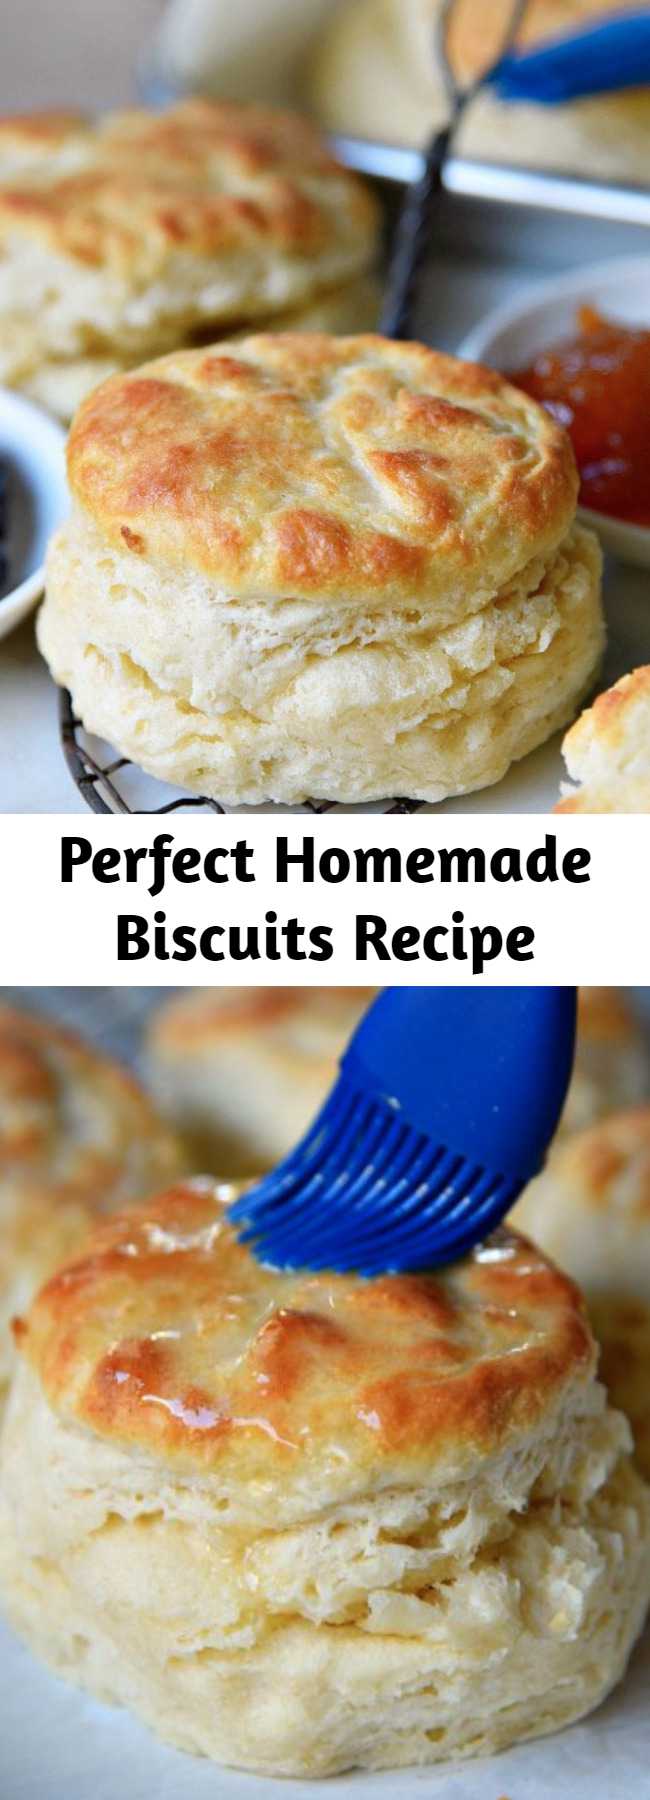 Perfect Homemade Biscuits Recipe - The BEST Homemade Biscuit recipe you’ll ever try! These easy, homemade biscuits are soft, fluffy, made completely from scratch and can be on your table in about 15 minutes! A weekend staple in our house! #biscuit #biscuits #homemade #fromscratch #breakfast #brunch #recipe #recipes #baking